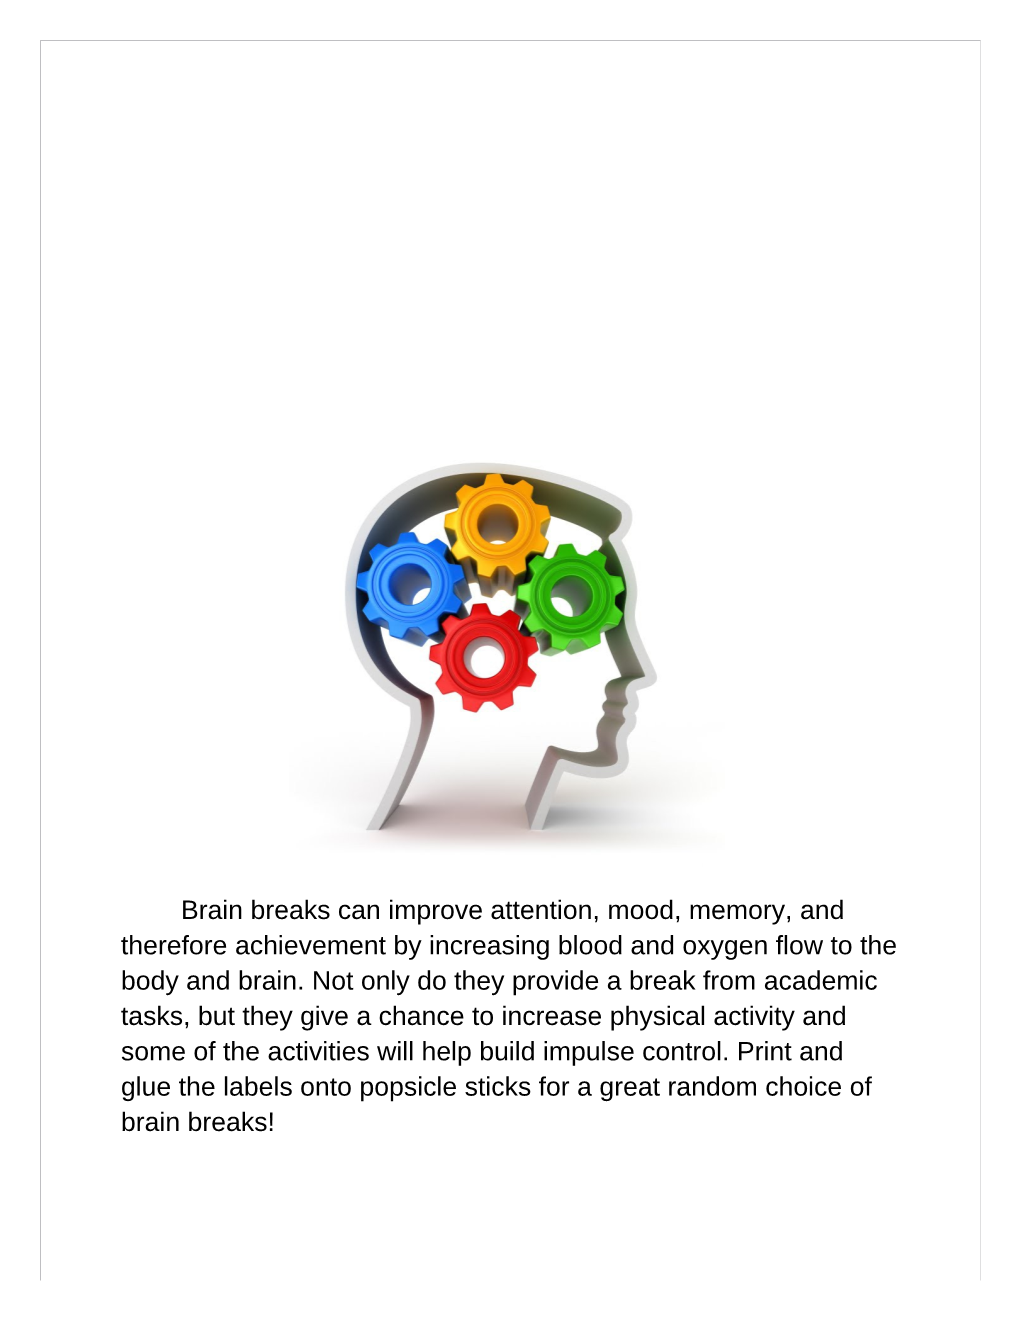 Brain Breaks Can Improve Attention, Mood, Memory, and Therefore Achievement by Increasing